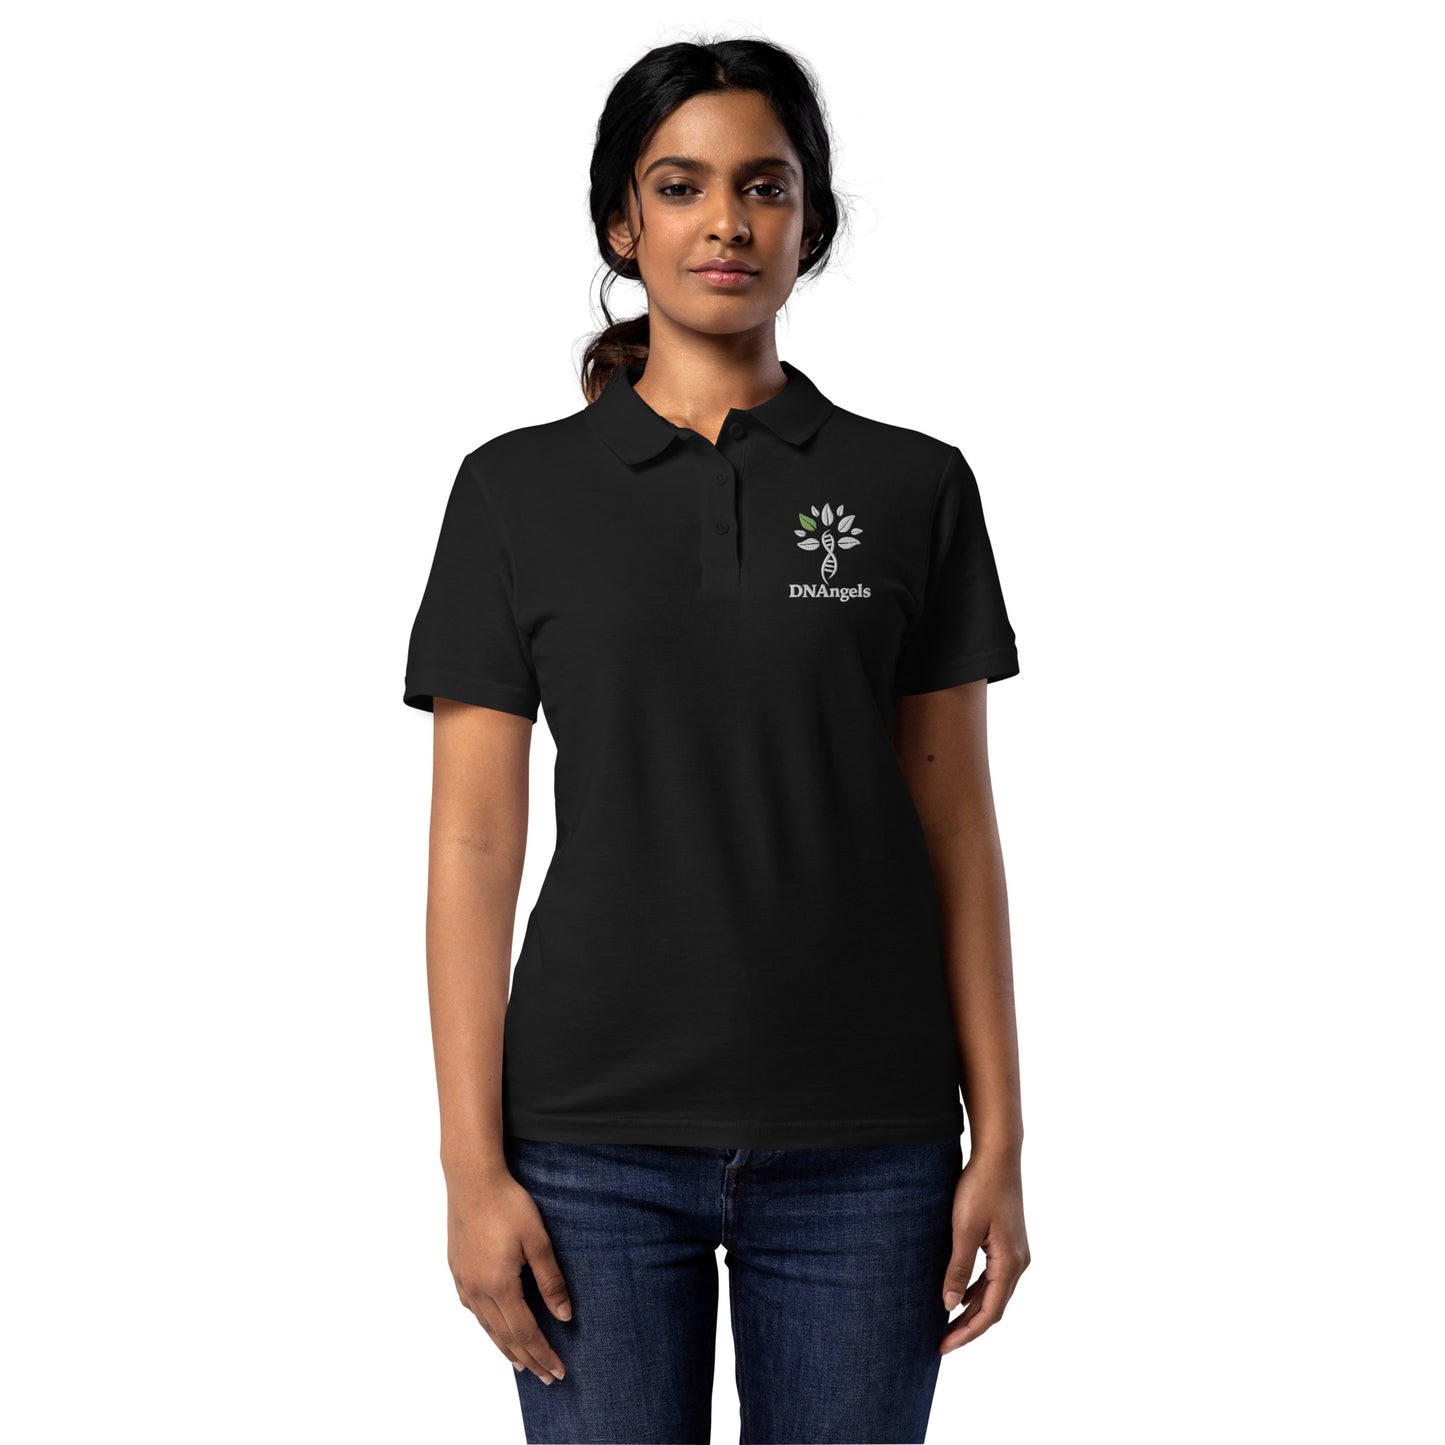 DNAngels Women’s Embroidered Polo